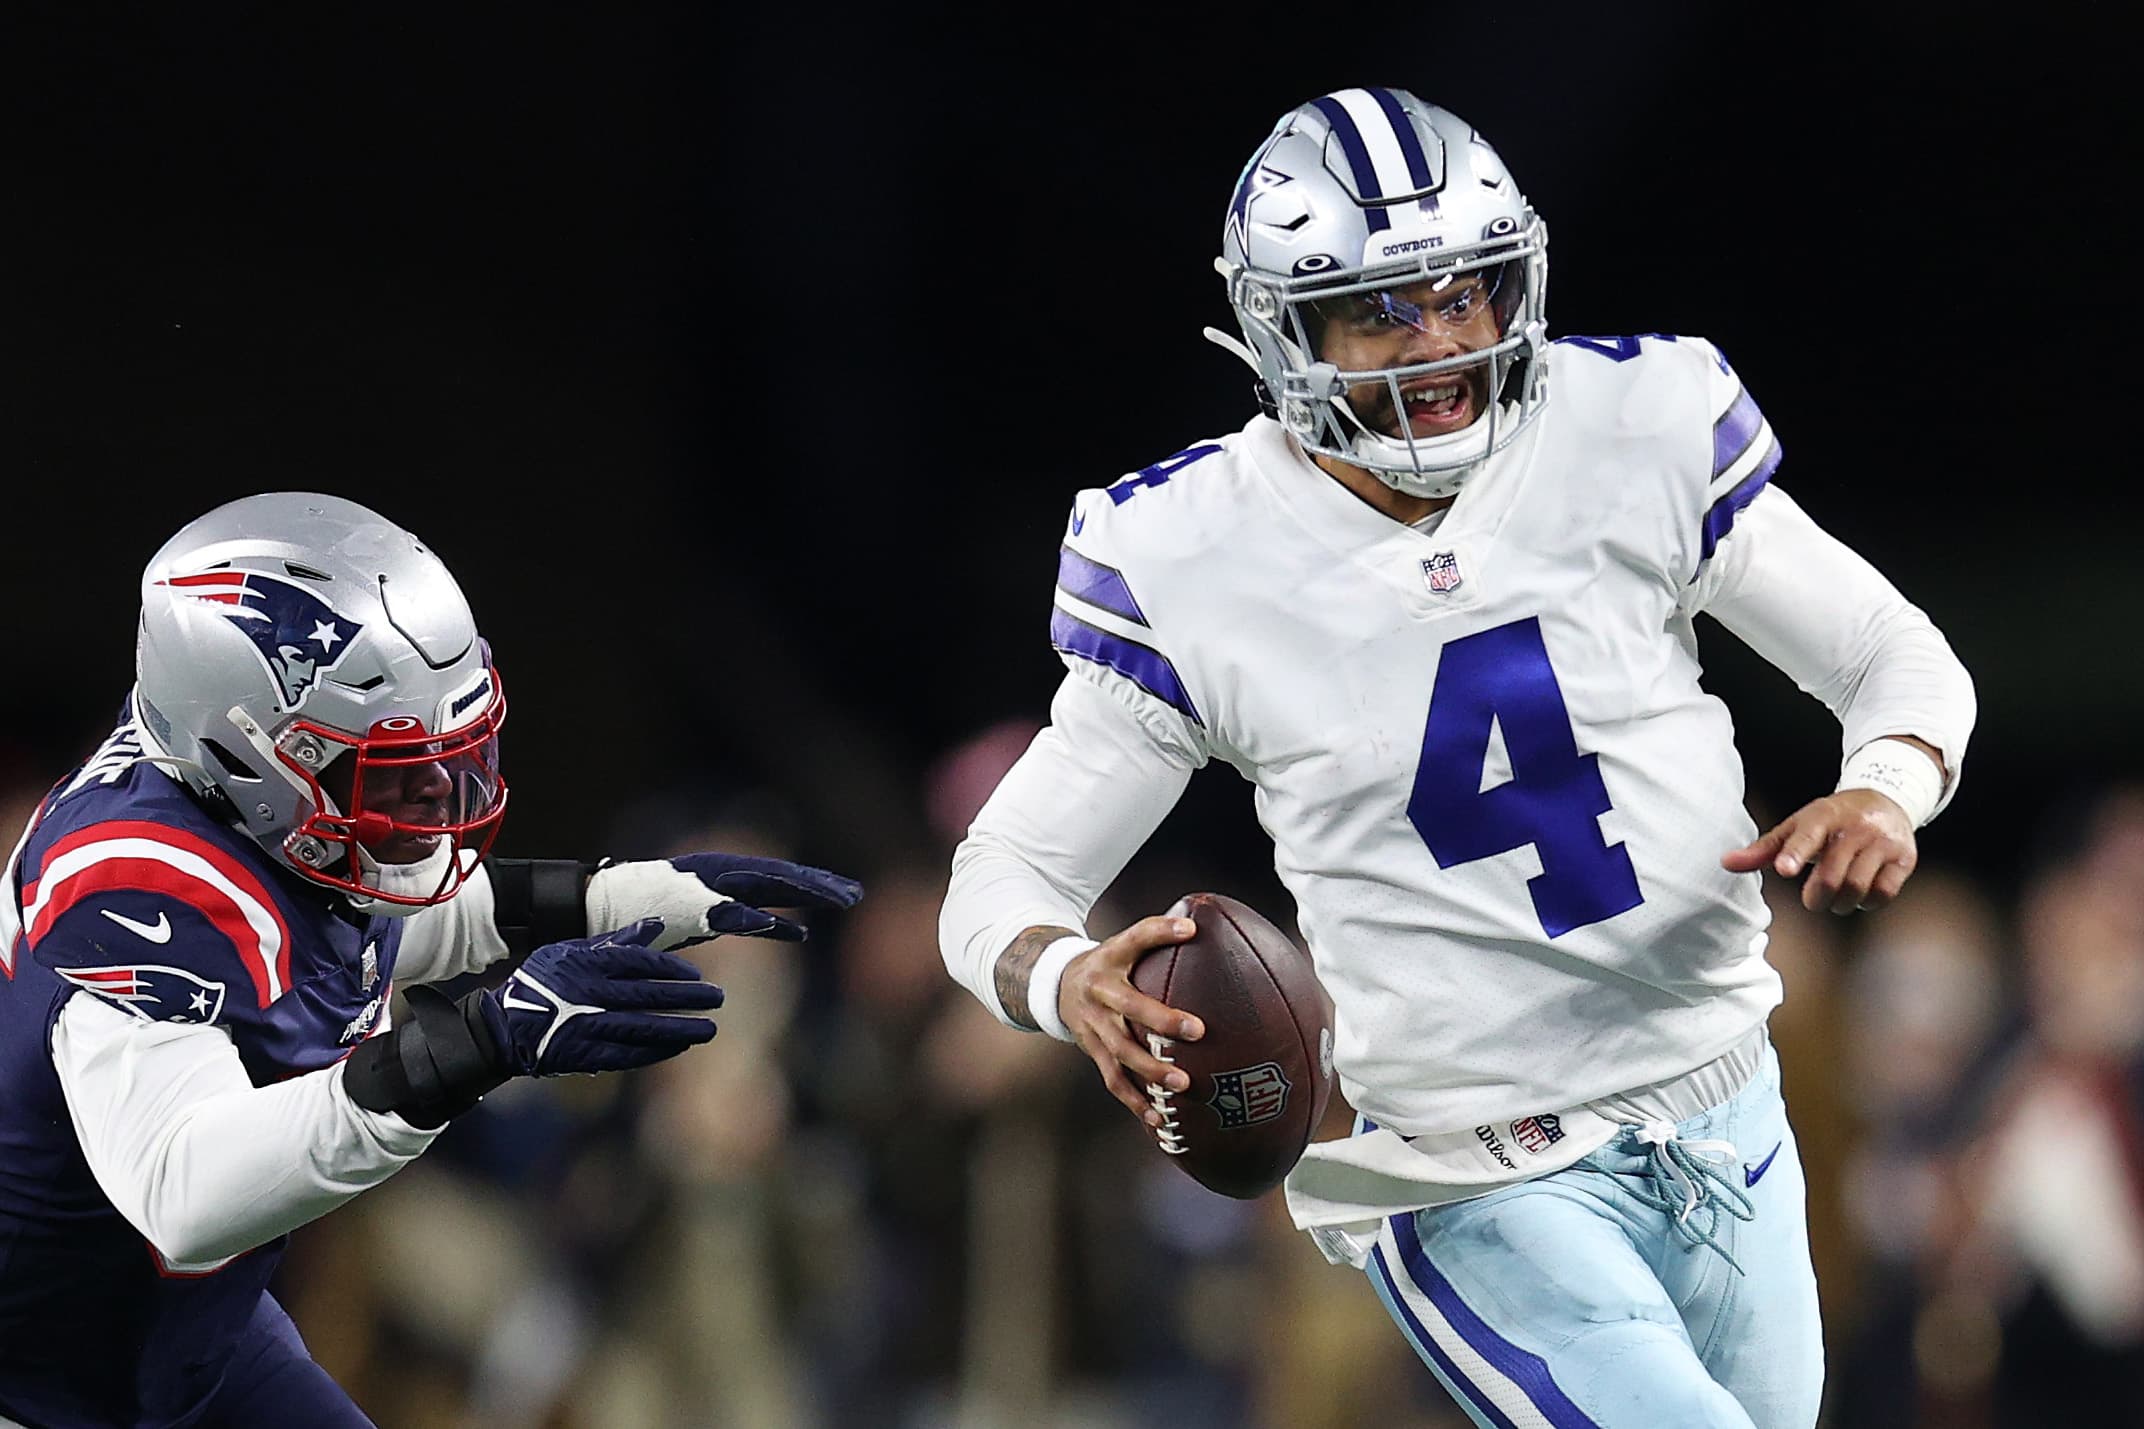 The Dallas Cowboys are back and fans of 'America's Team' are elated over the NFL..